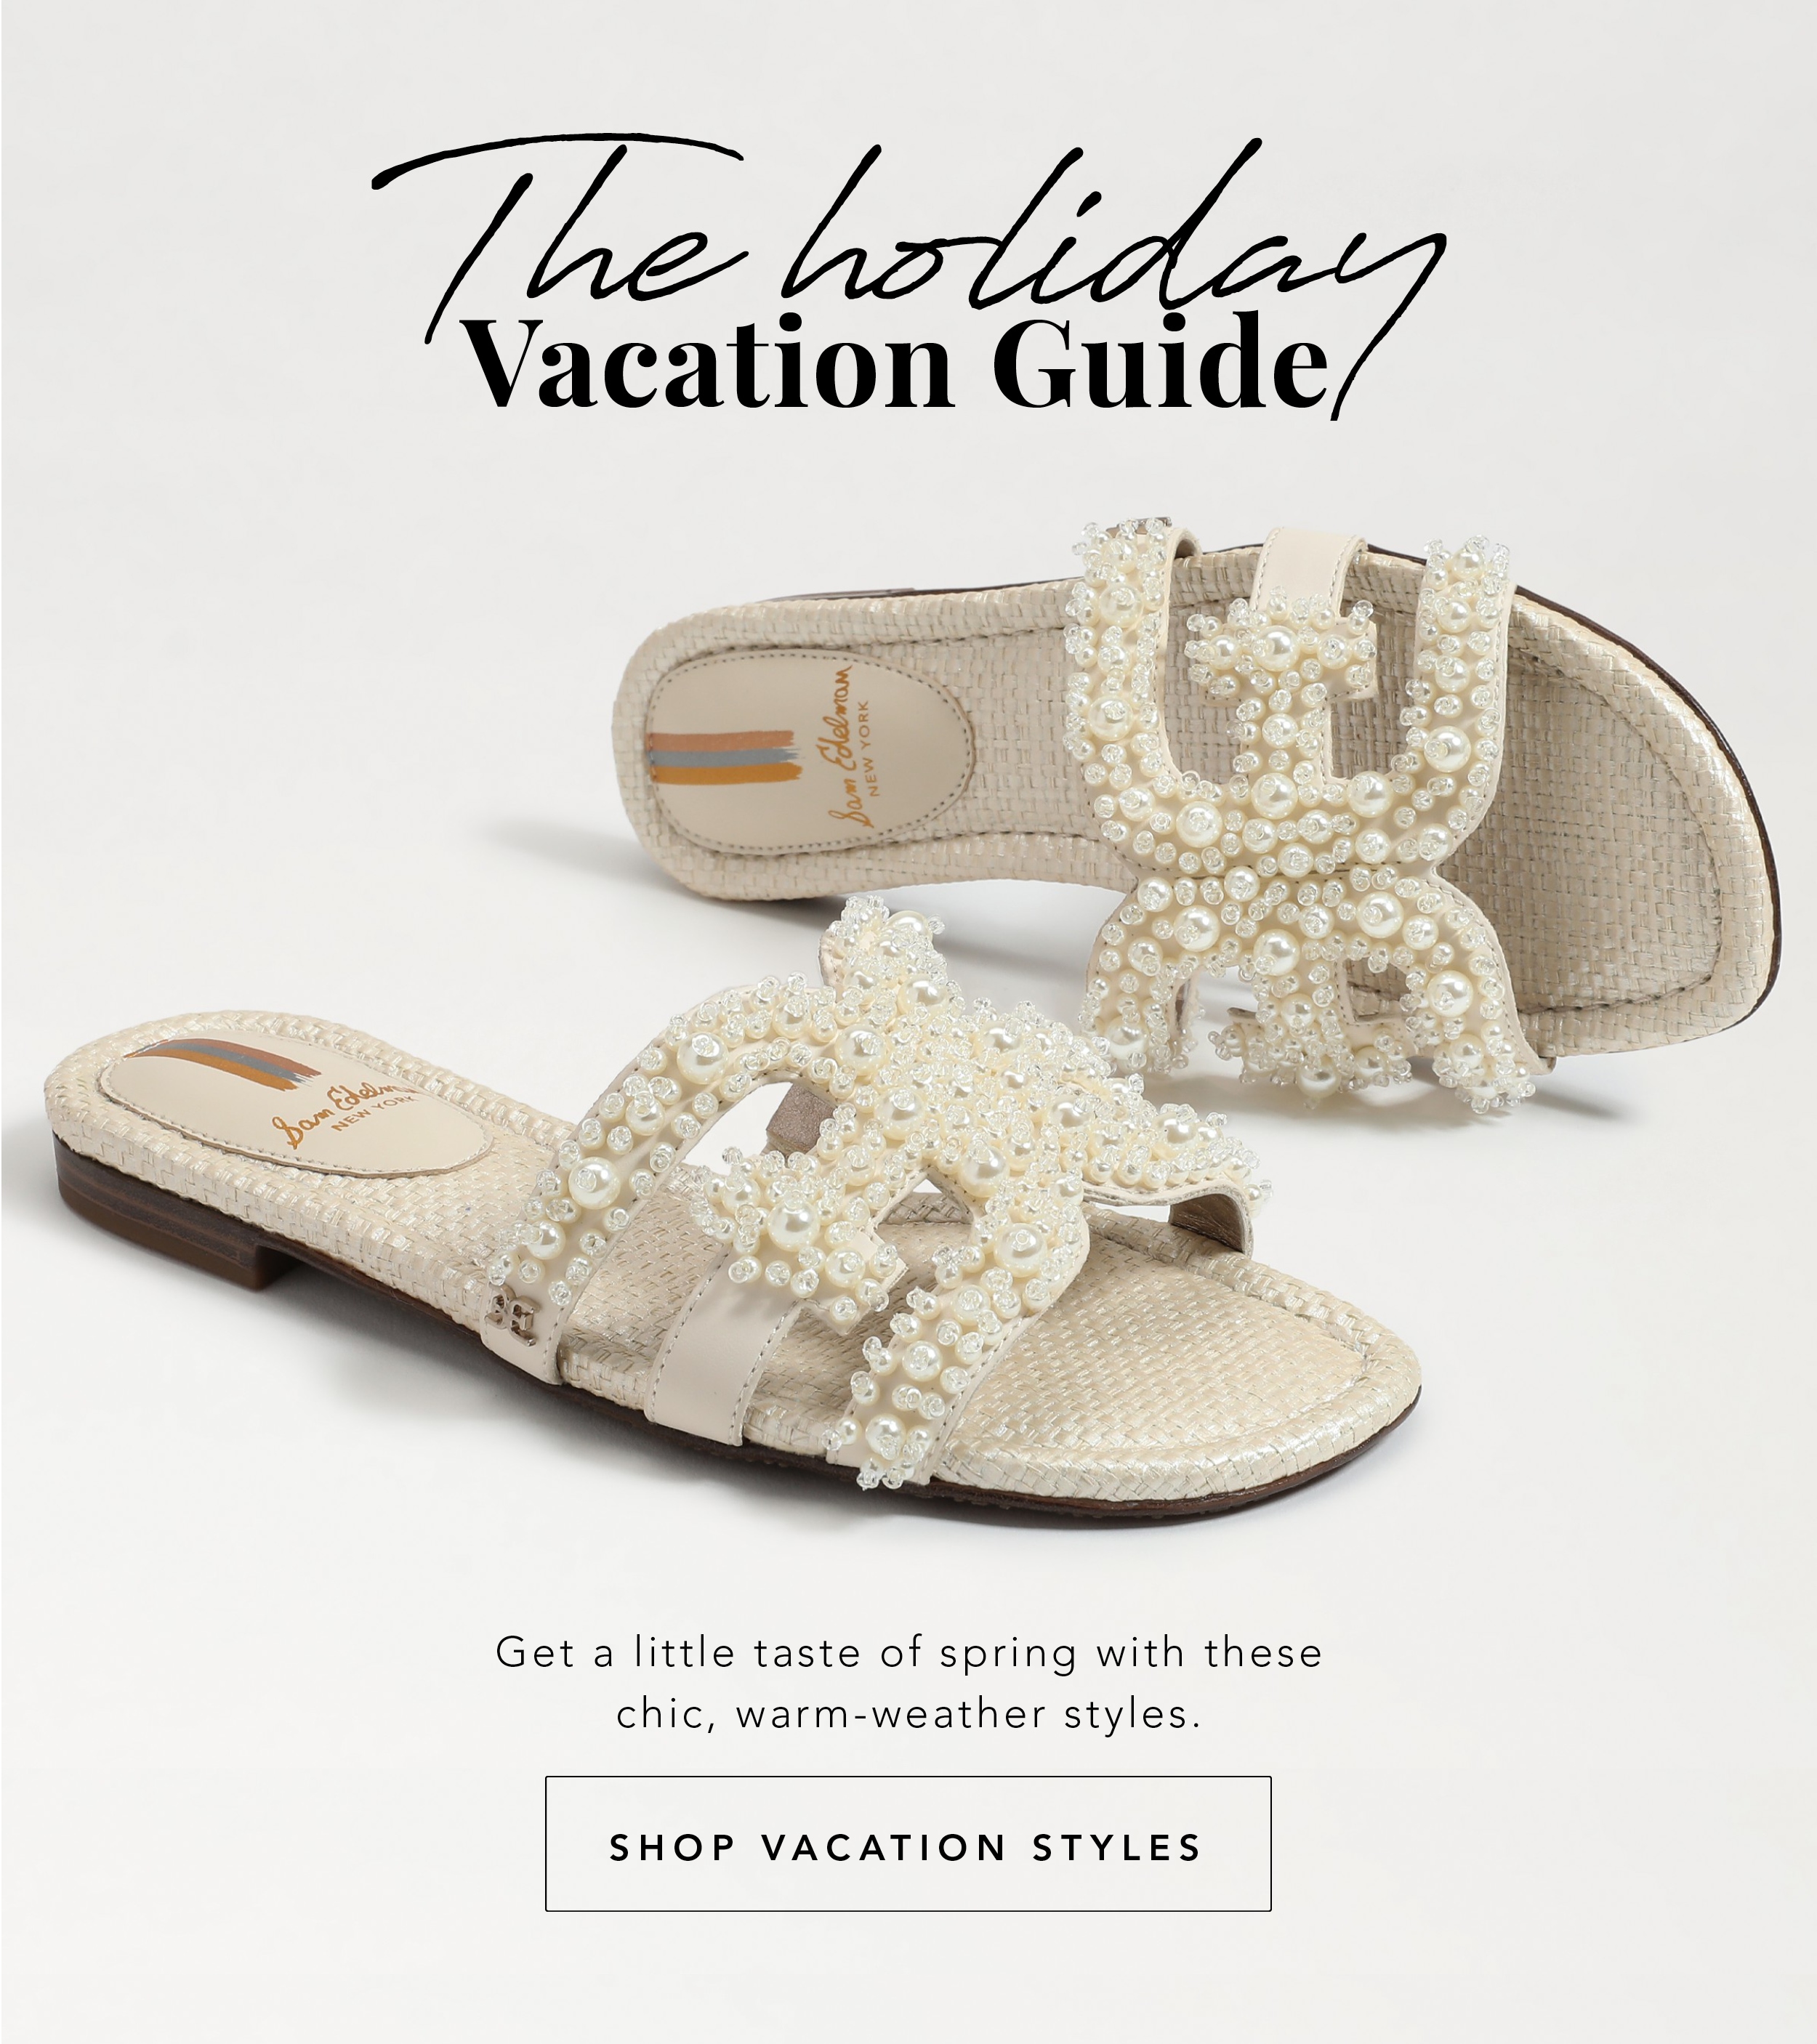 Shop Vacation Styles